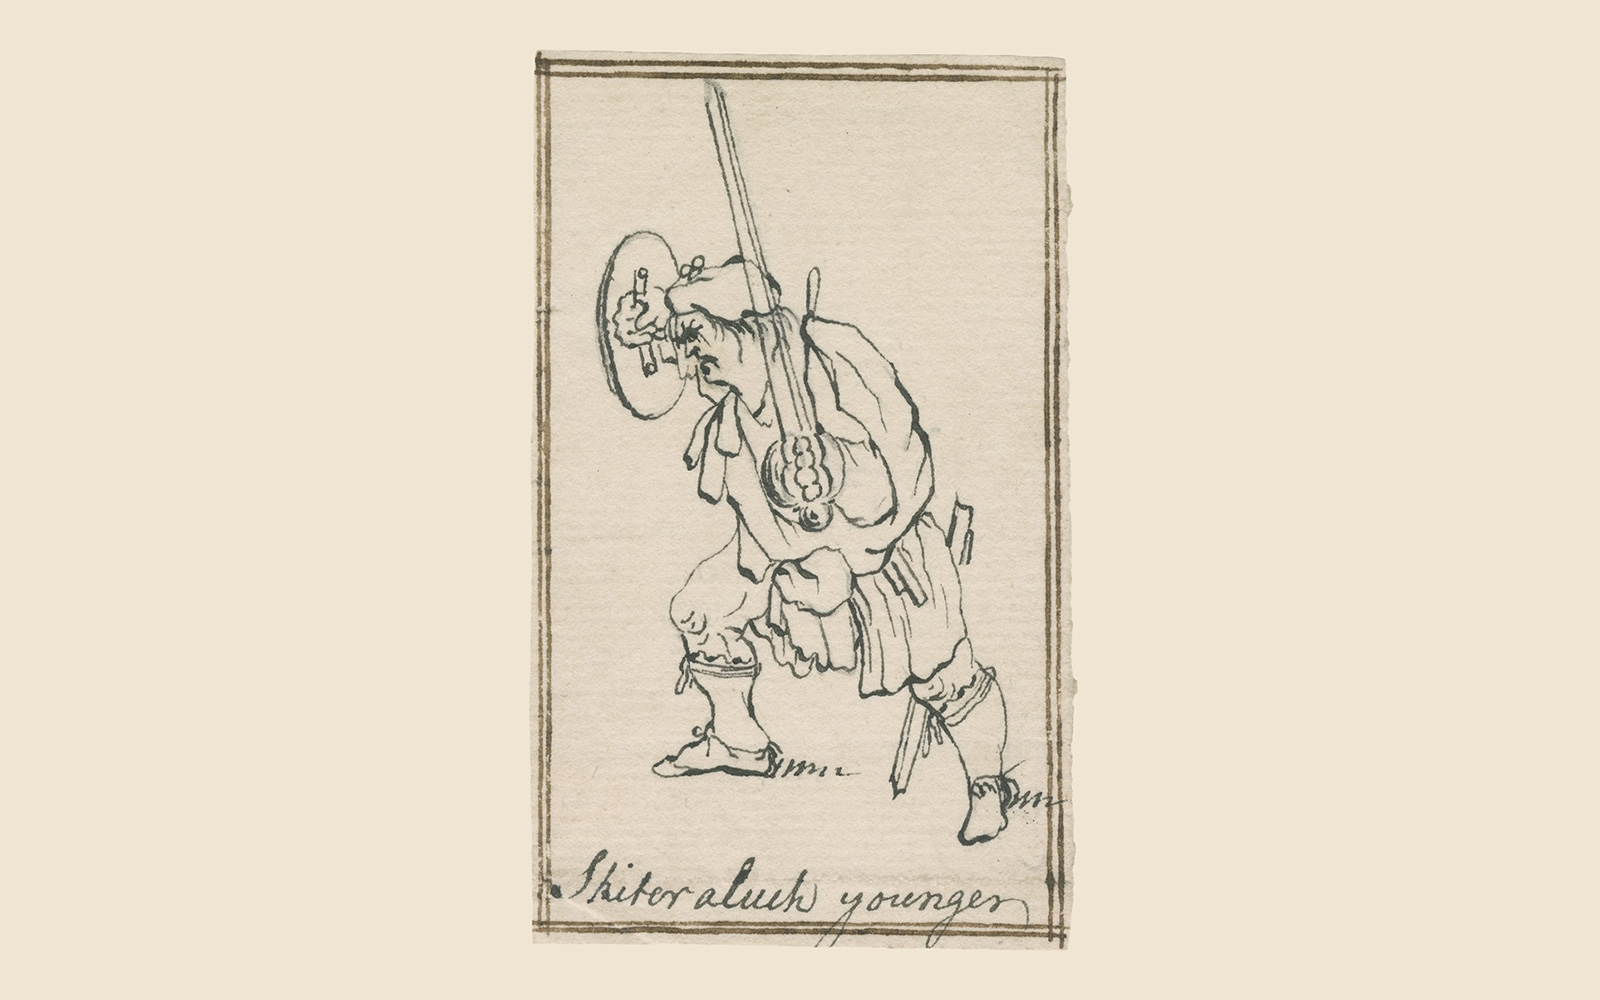 Skiteraluch younger' wielding a broadsword and small targe. Another Whig parody of Gaelic denominations and martial bombast, rather than any particular Jacobite officer.